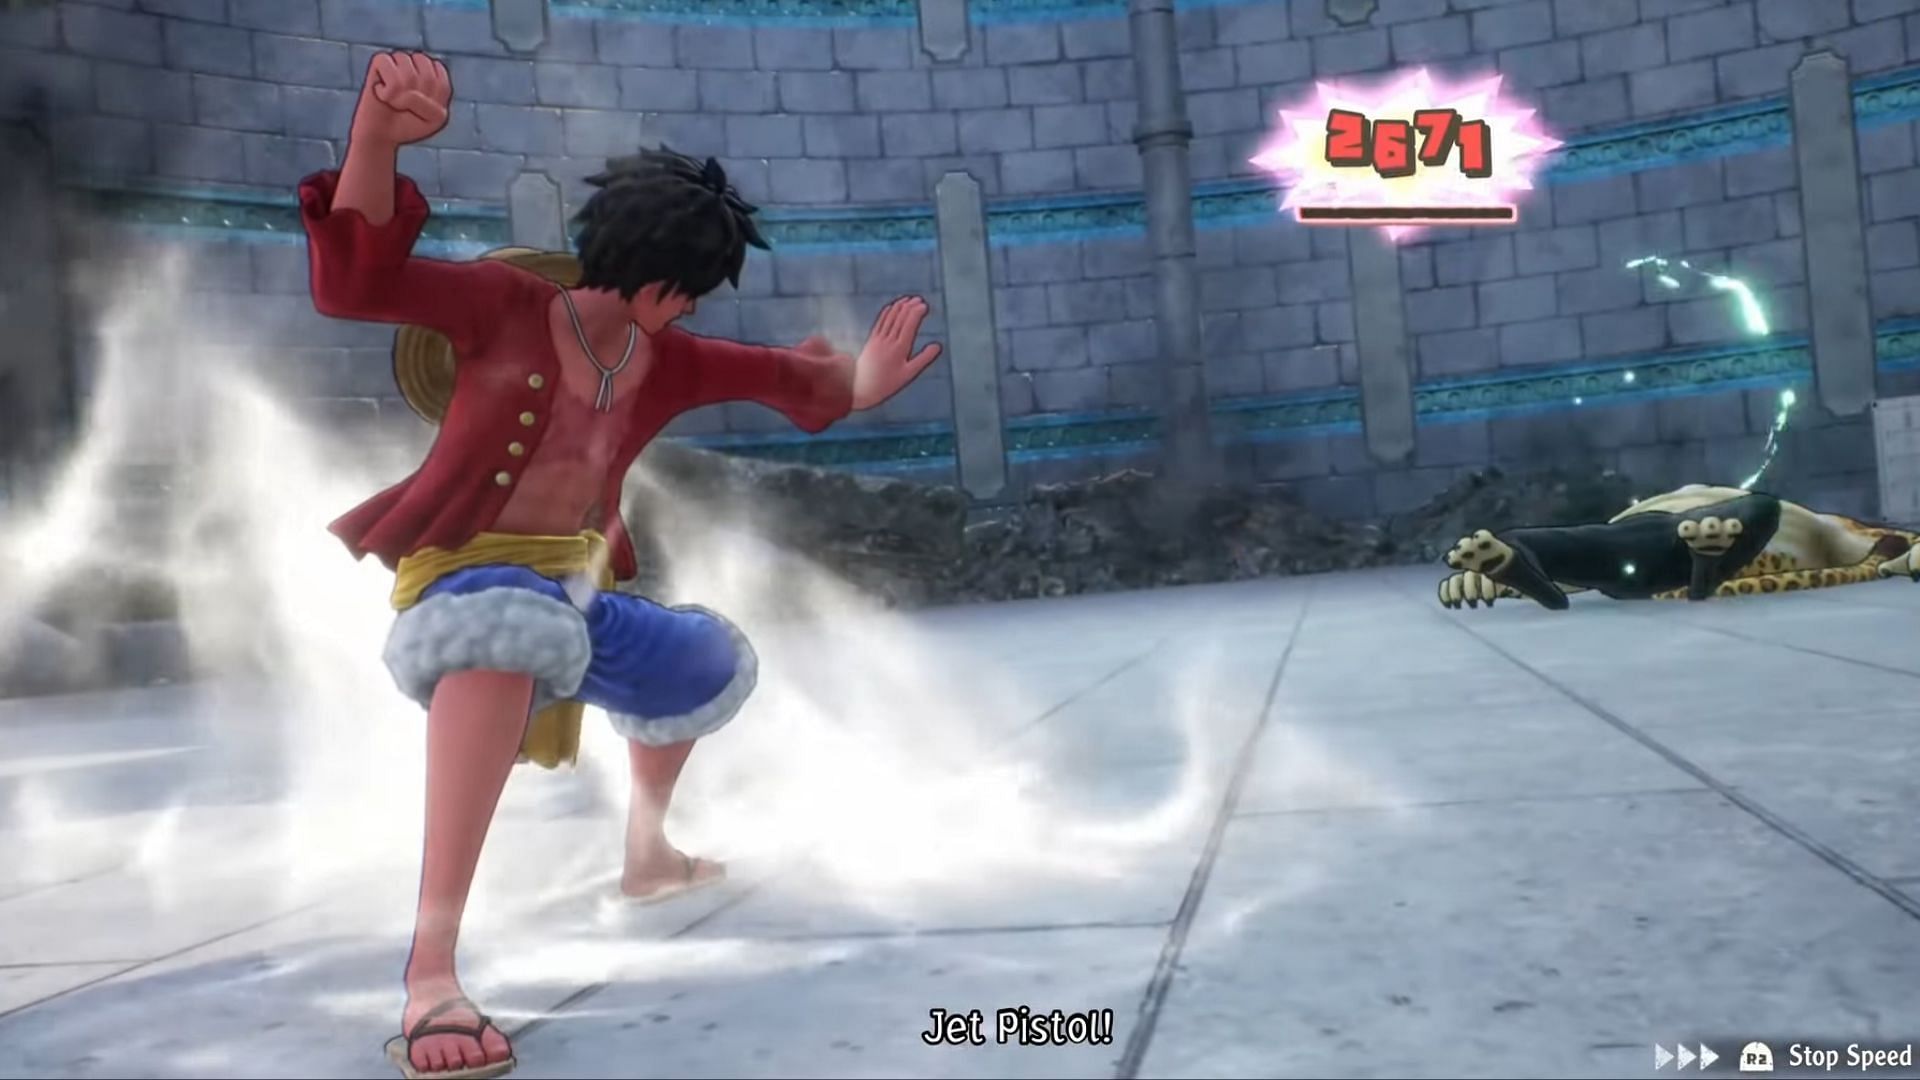 Luffy's Gum Gum Jet Pistol deals a lot of damage in One Piece Odyssey (Image via Bandai Namco)